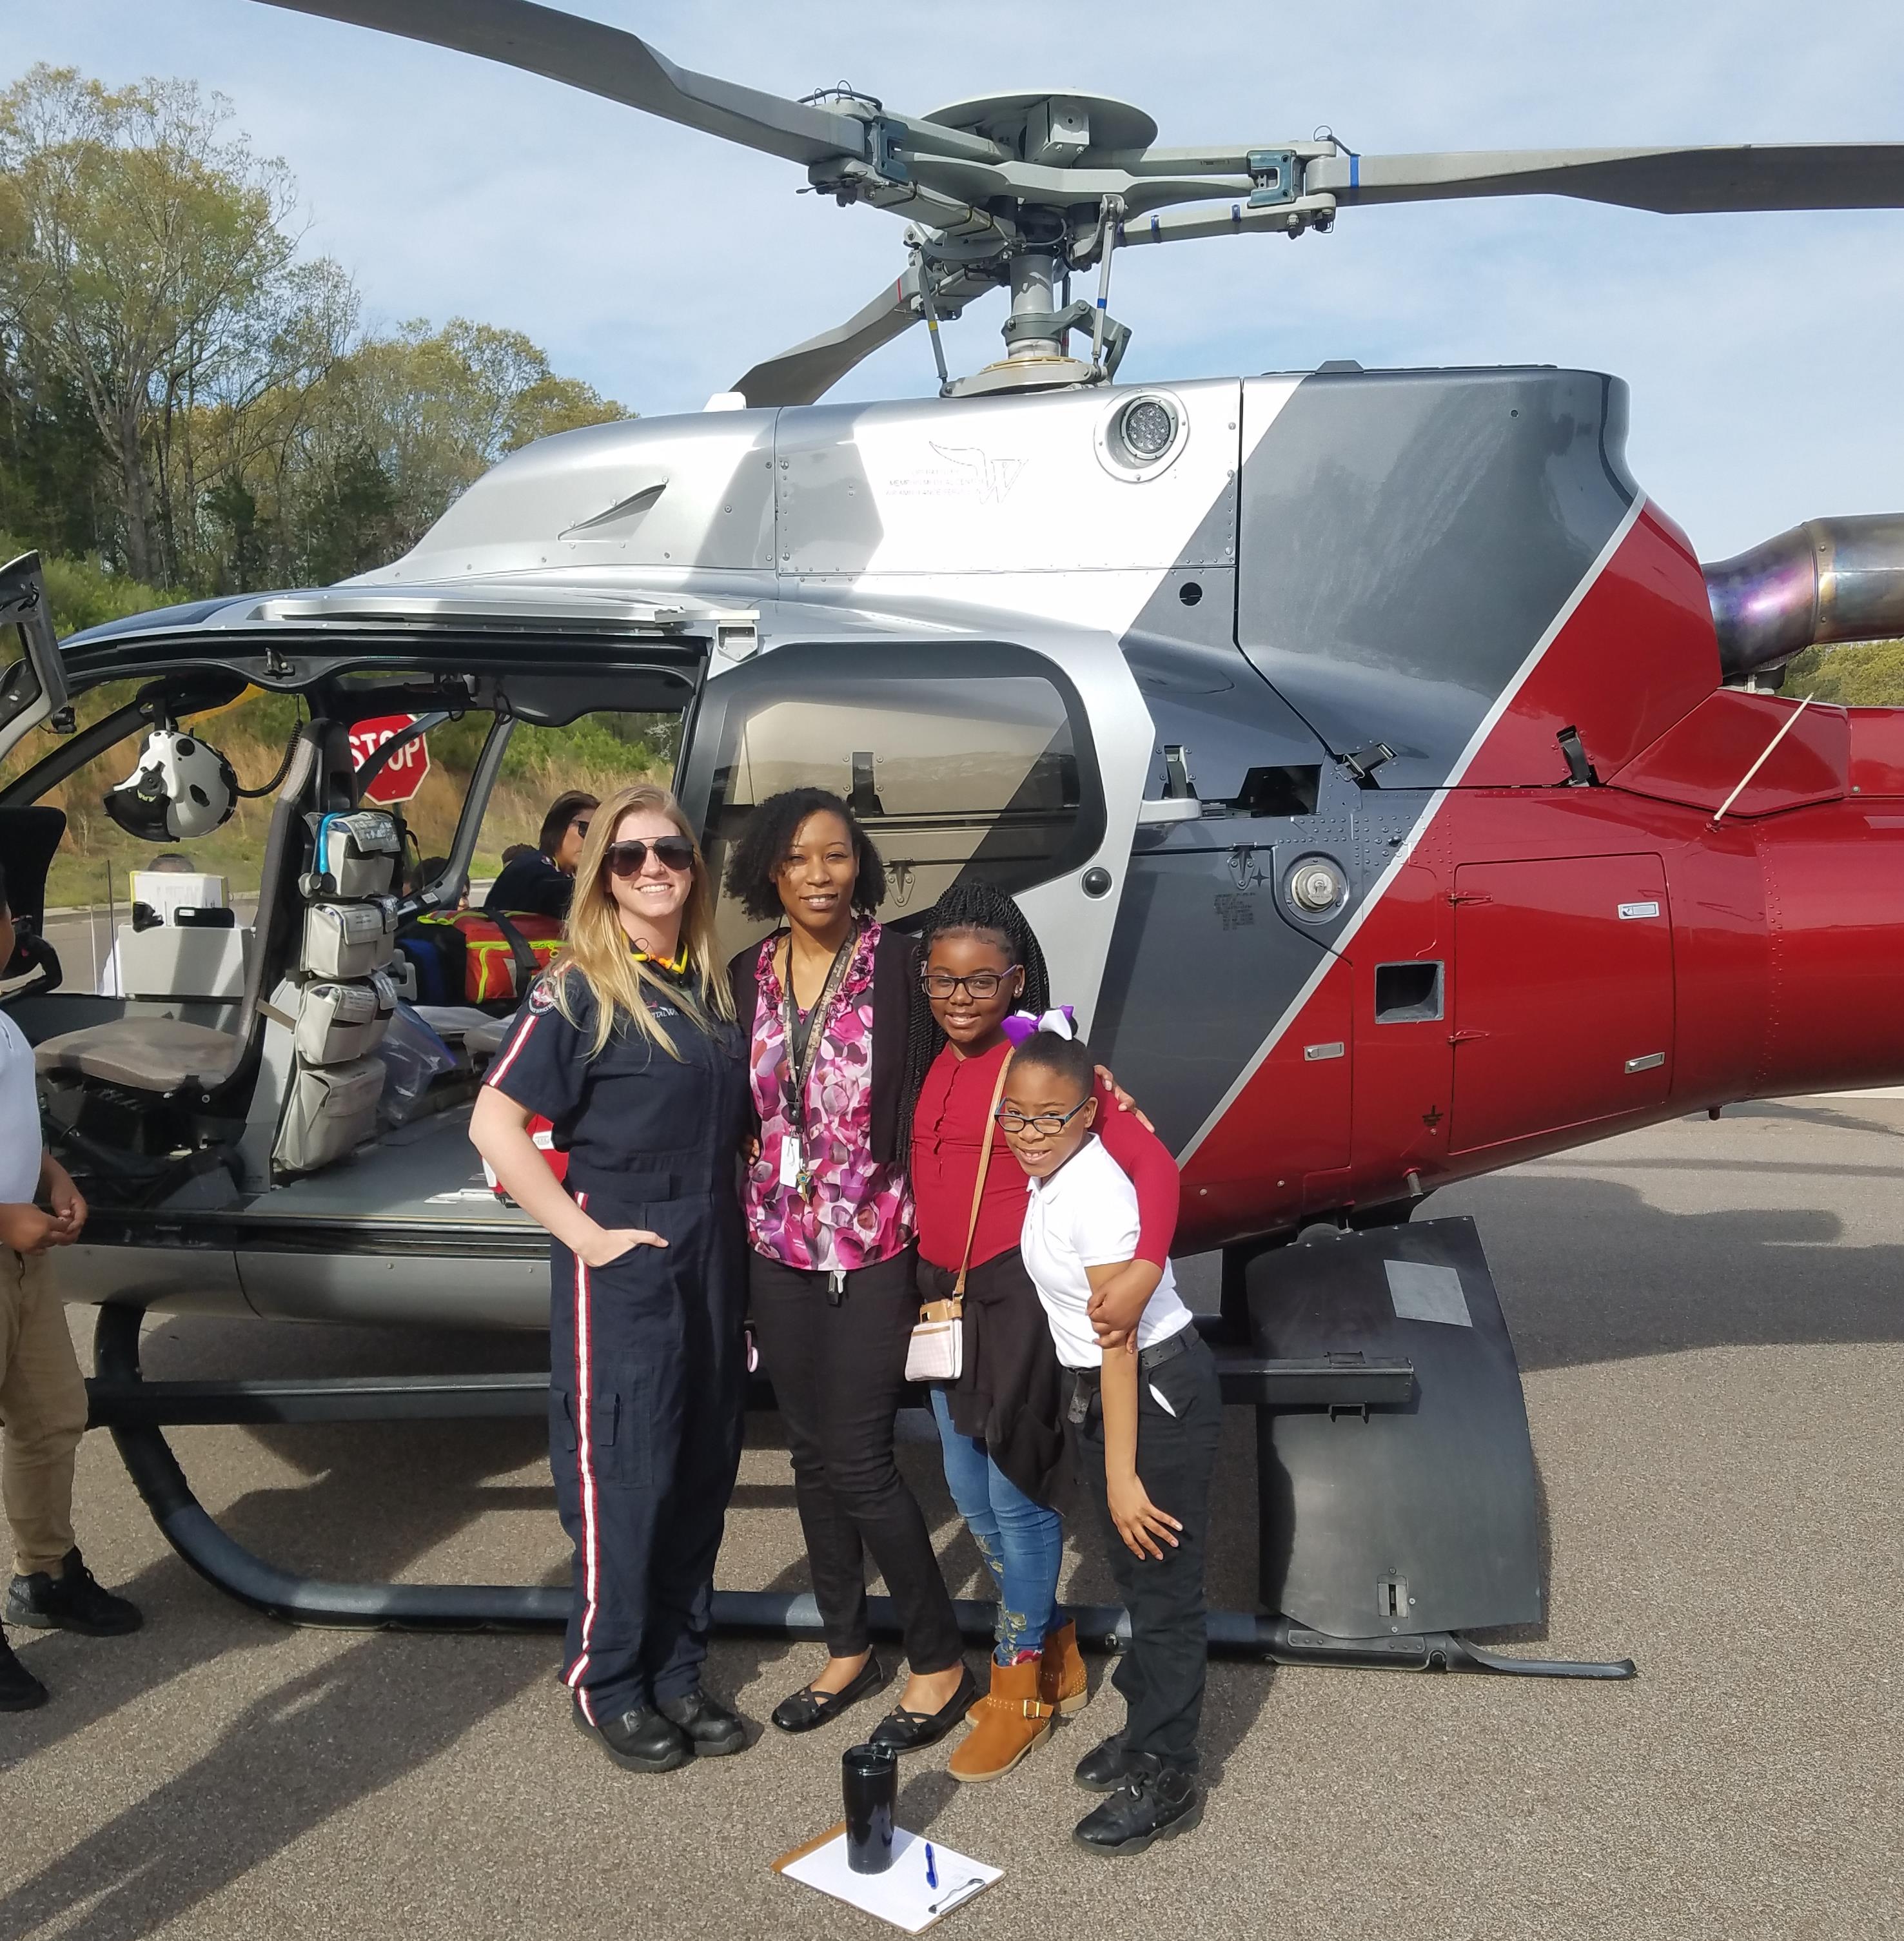 EMT helicopter with staff and students